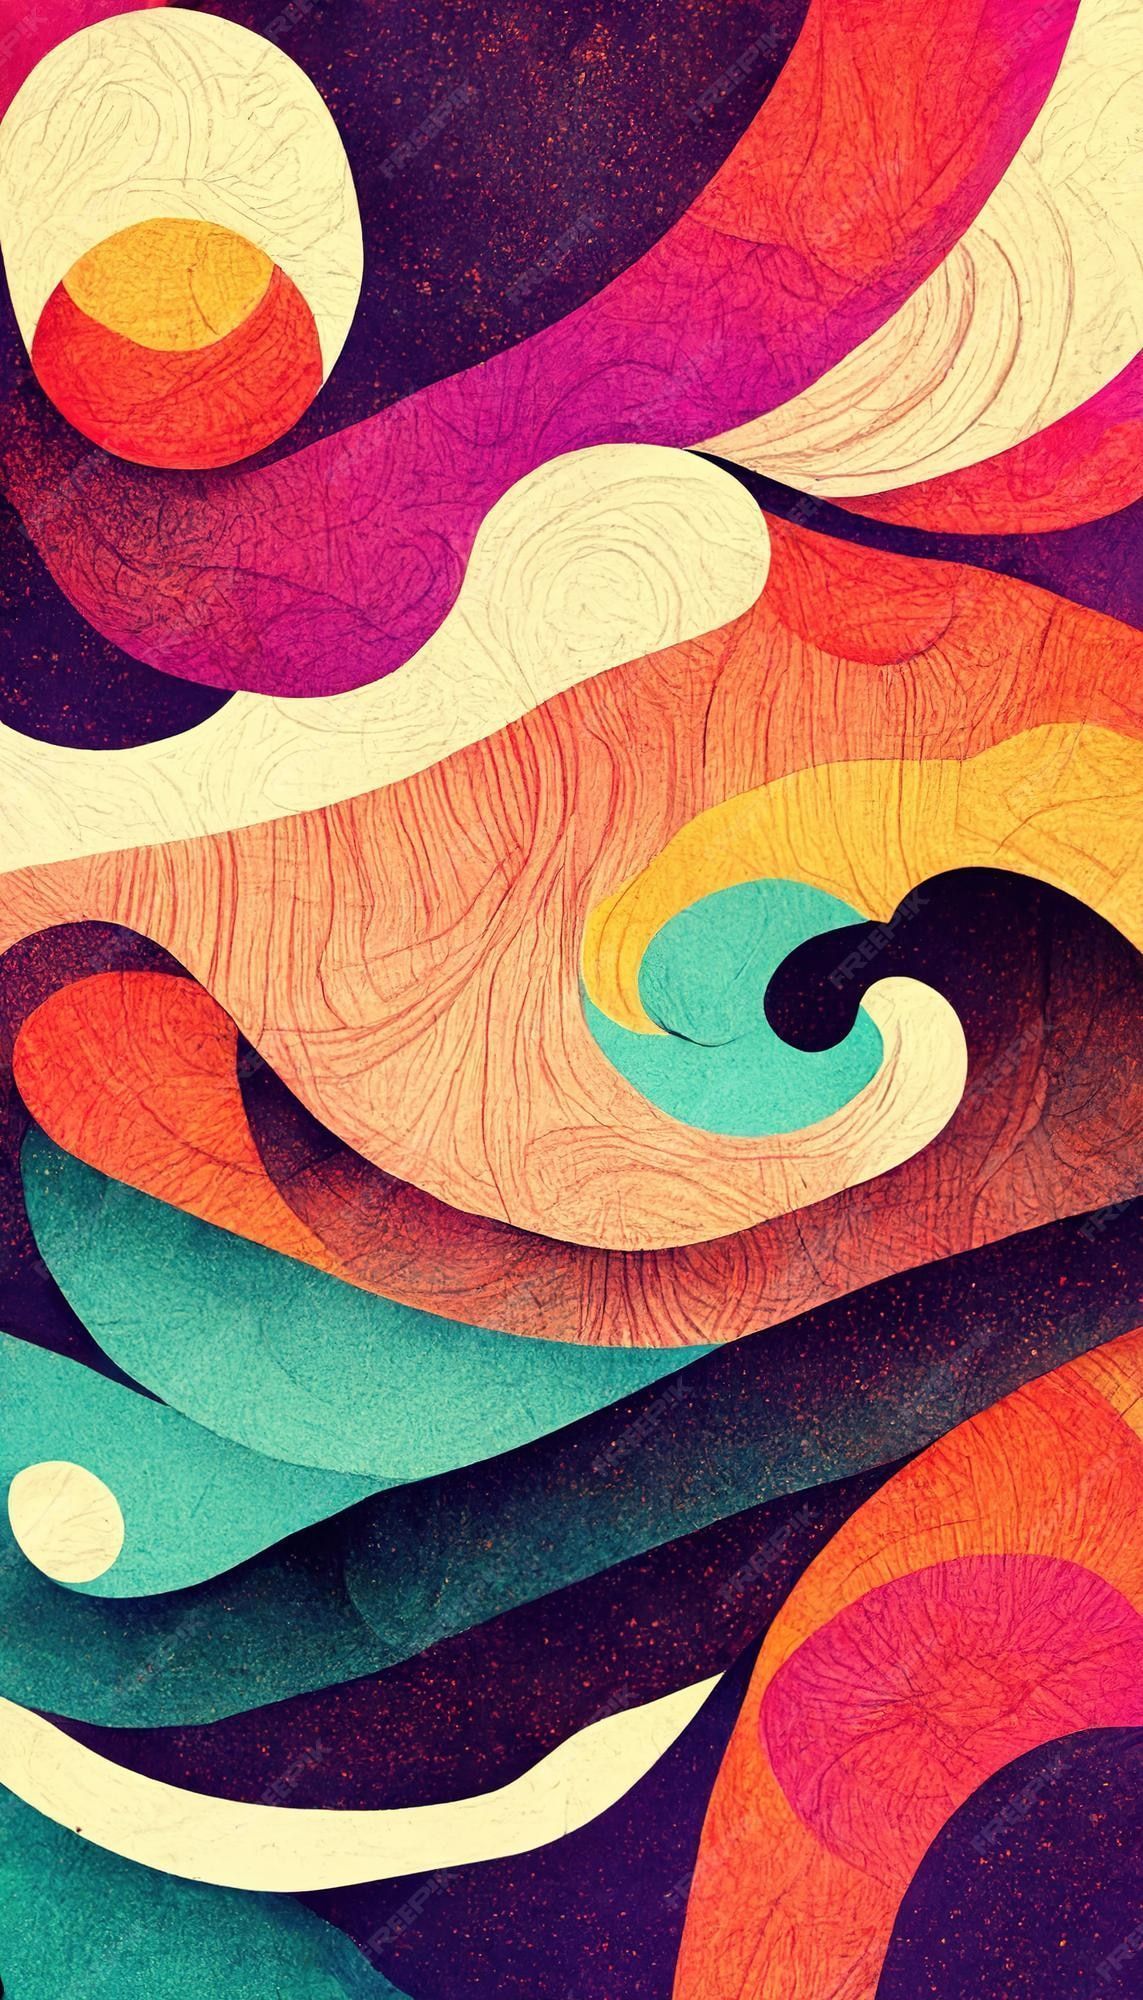 Premium Photo. Groovy psychedelic abstract wavy decorative funky background hippie trendy design 3D illustration